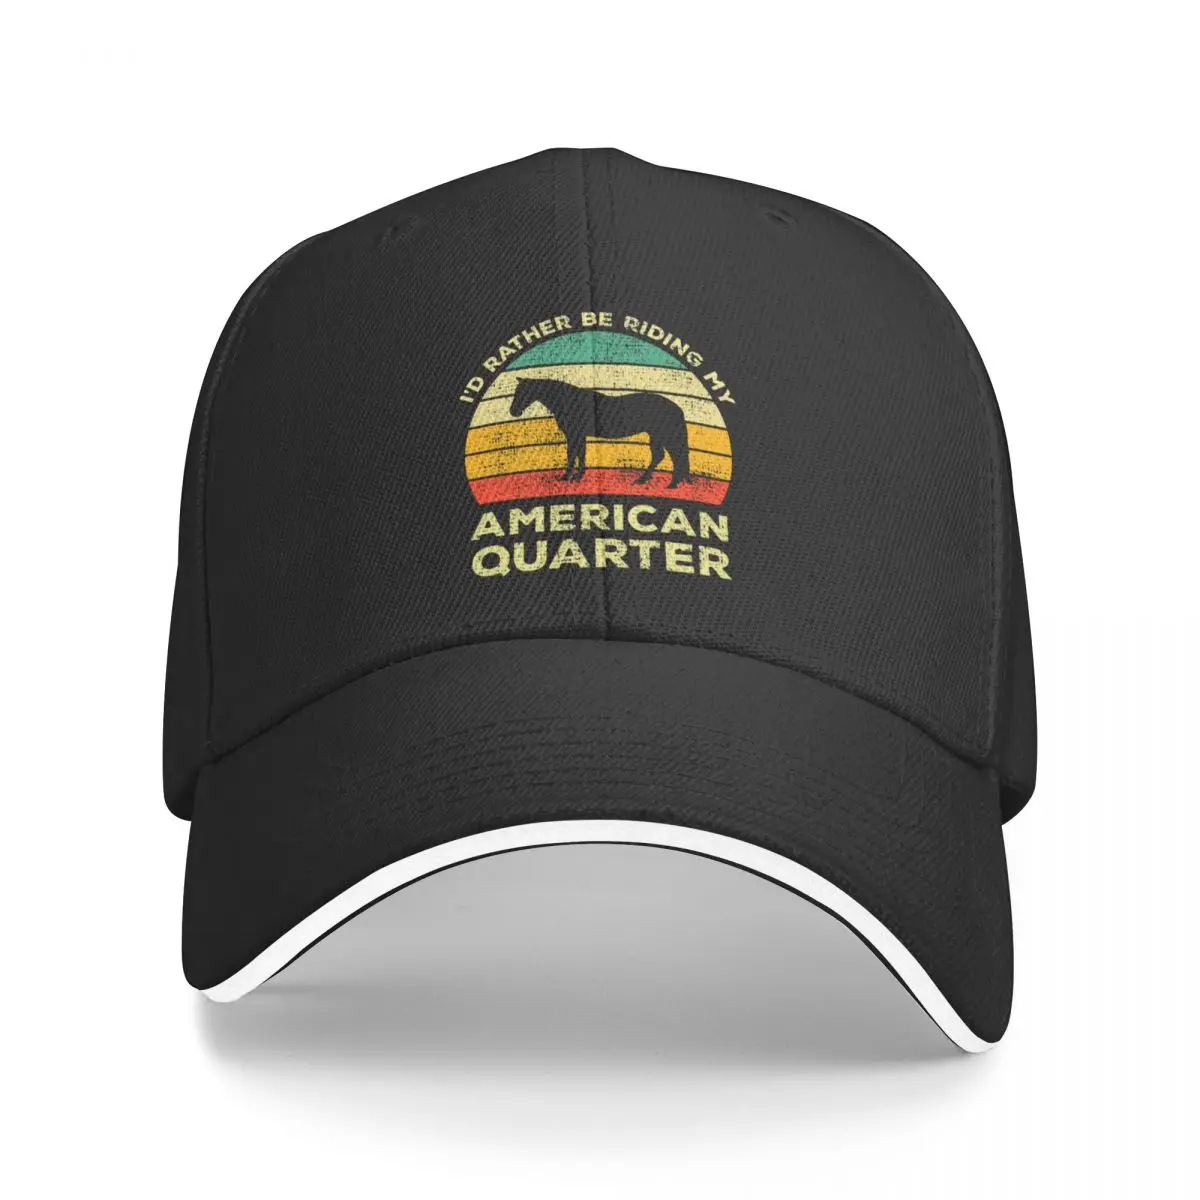 

I’d Rather Be Riding My American Quarter Vintage Gift For American Quarter Horse Owners Baseball Cap Anime Women's Hats Men's